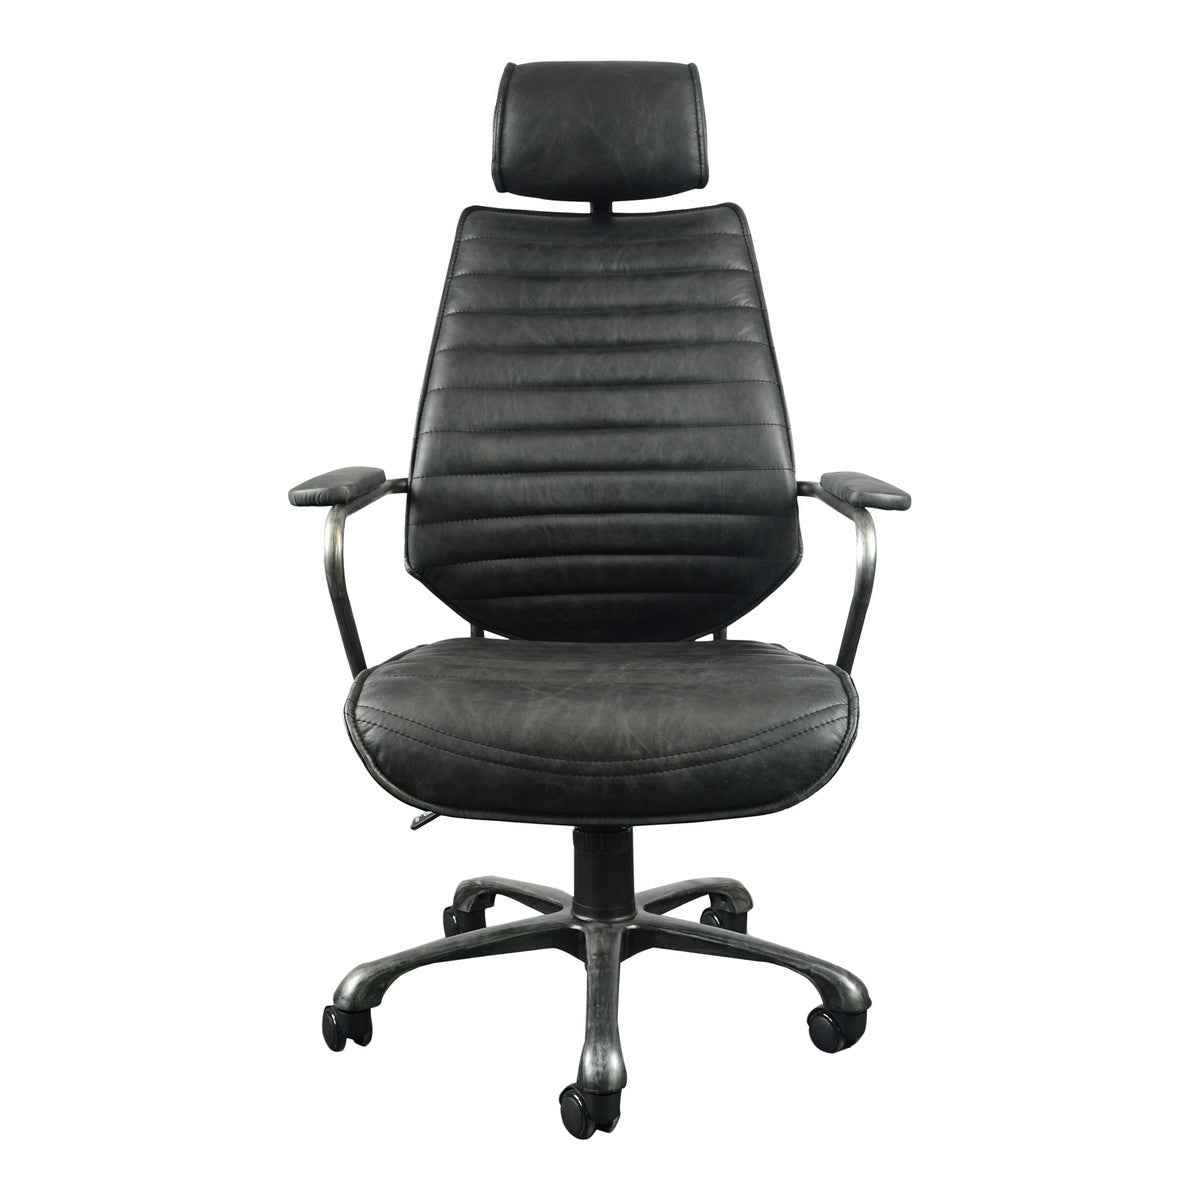 Moe's Home Collection Executive Swivel office Chair Black - PK-1081-02 - Moe's Home Collection - Office Chairs - Minimal And Modern - 1